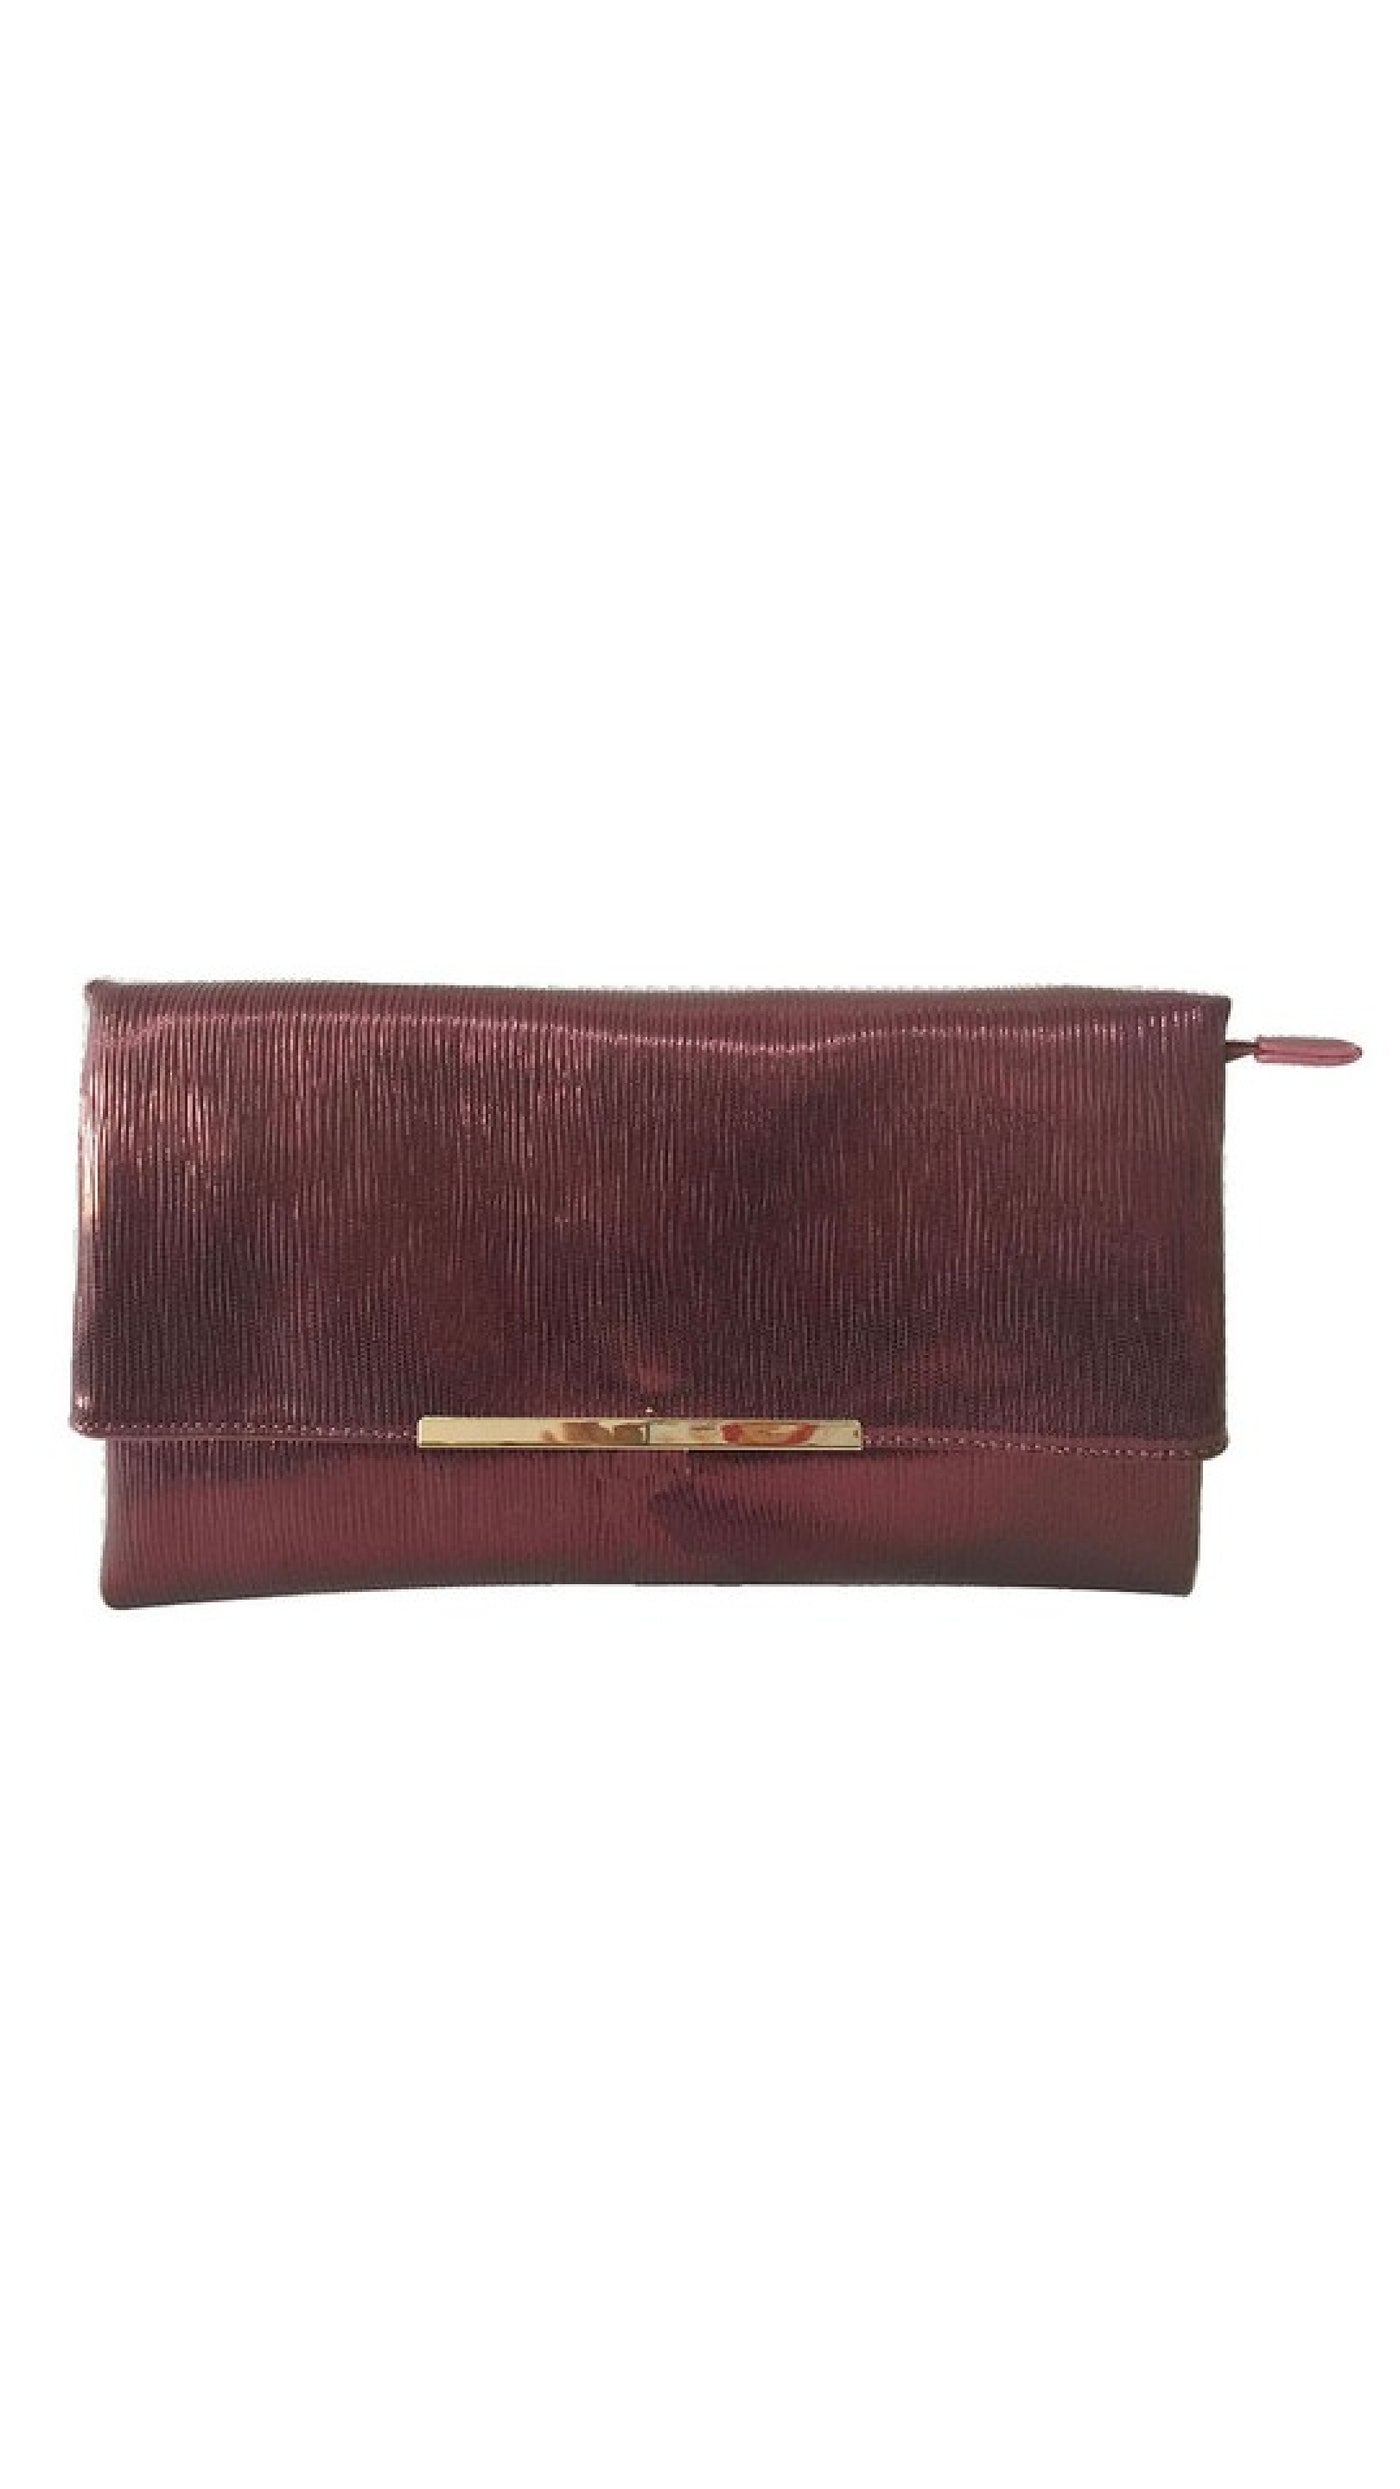 Taking It With Me Bag - Burgundy - Piper and Hollow Boutique